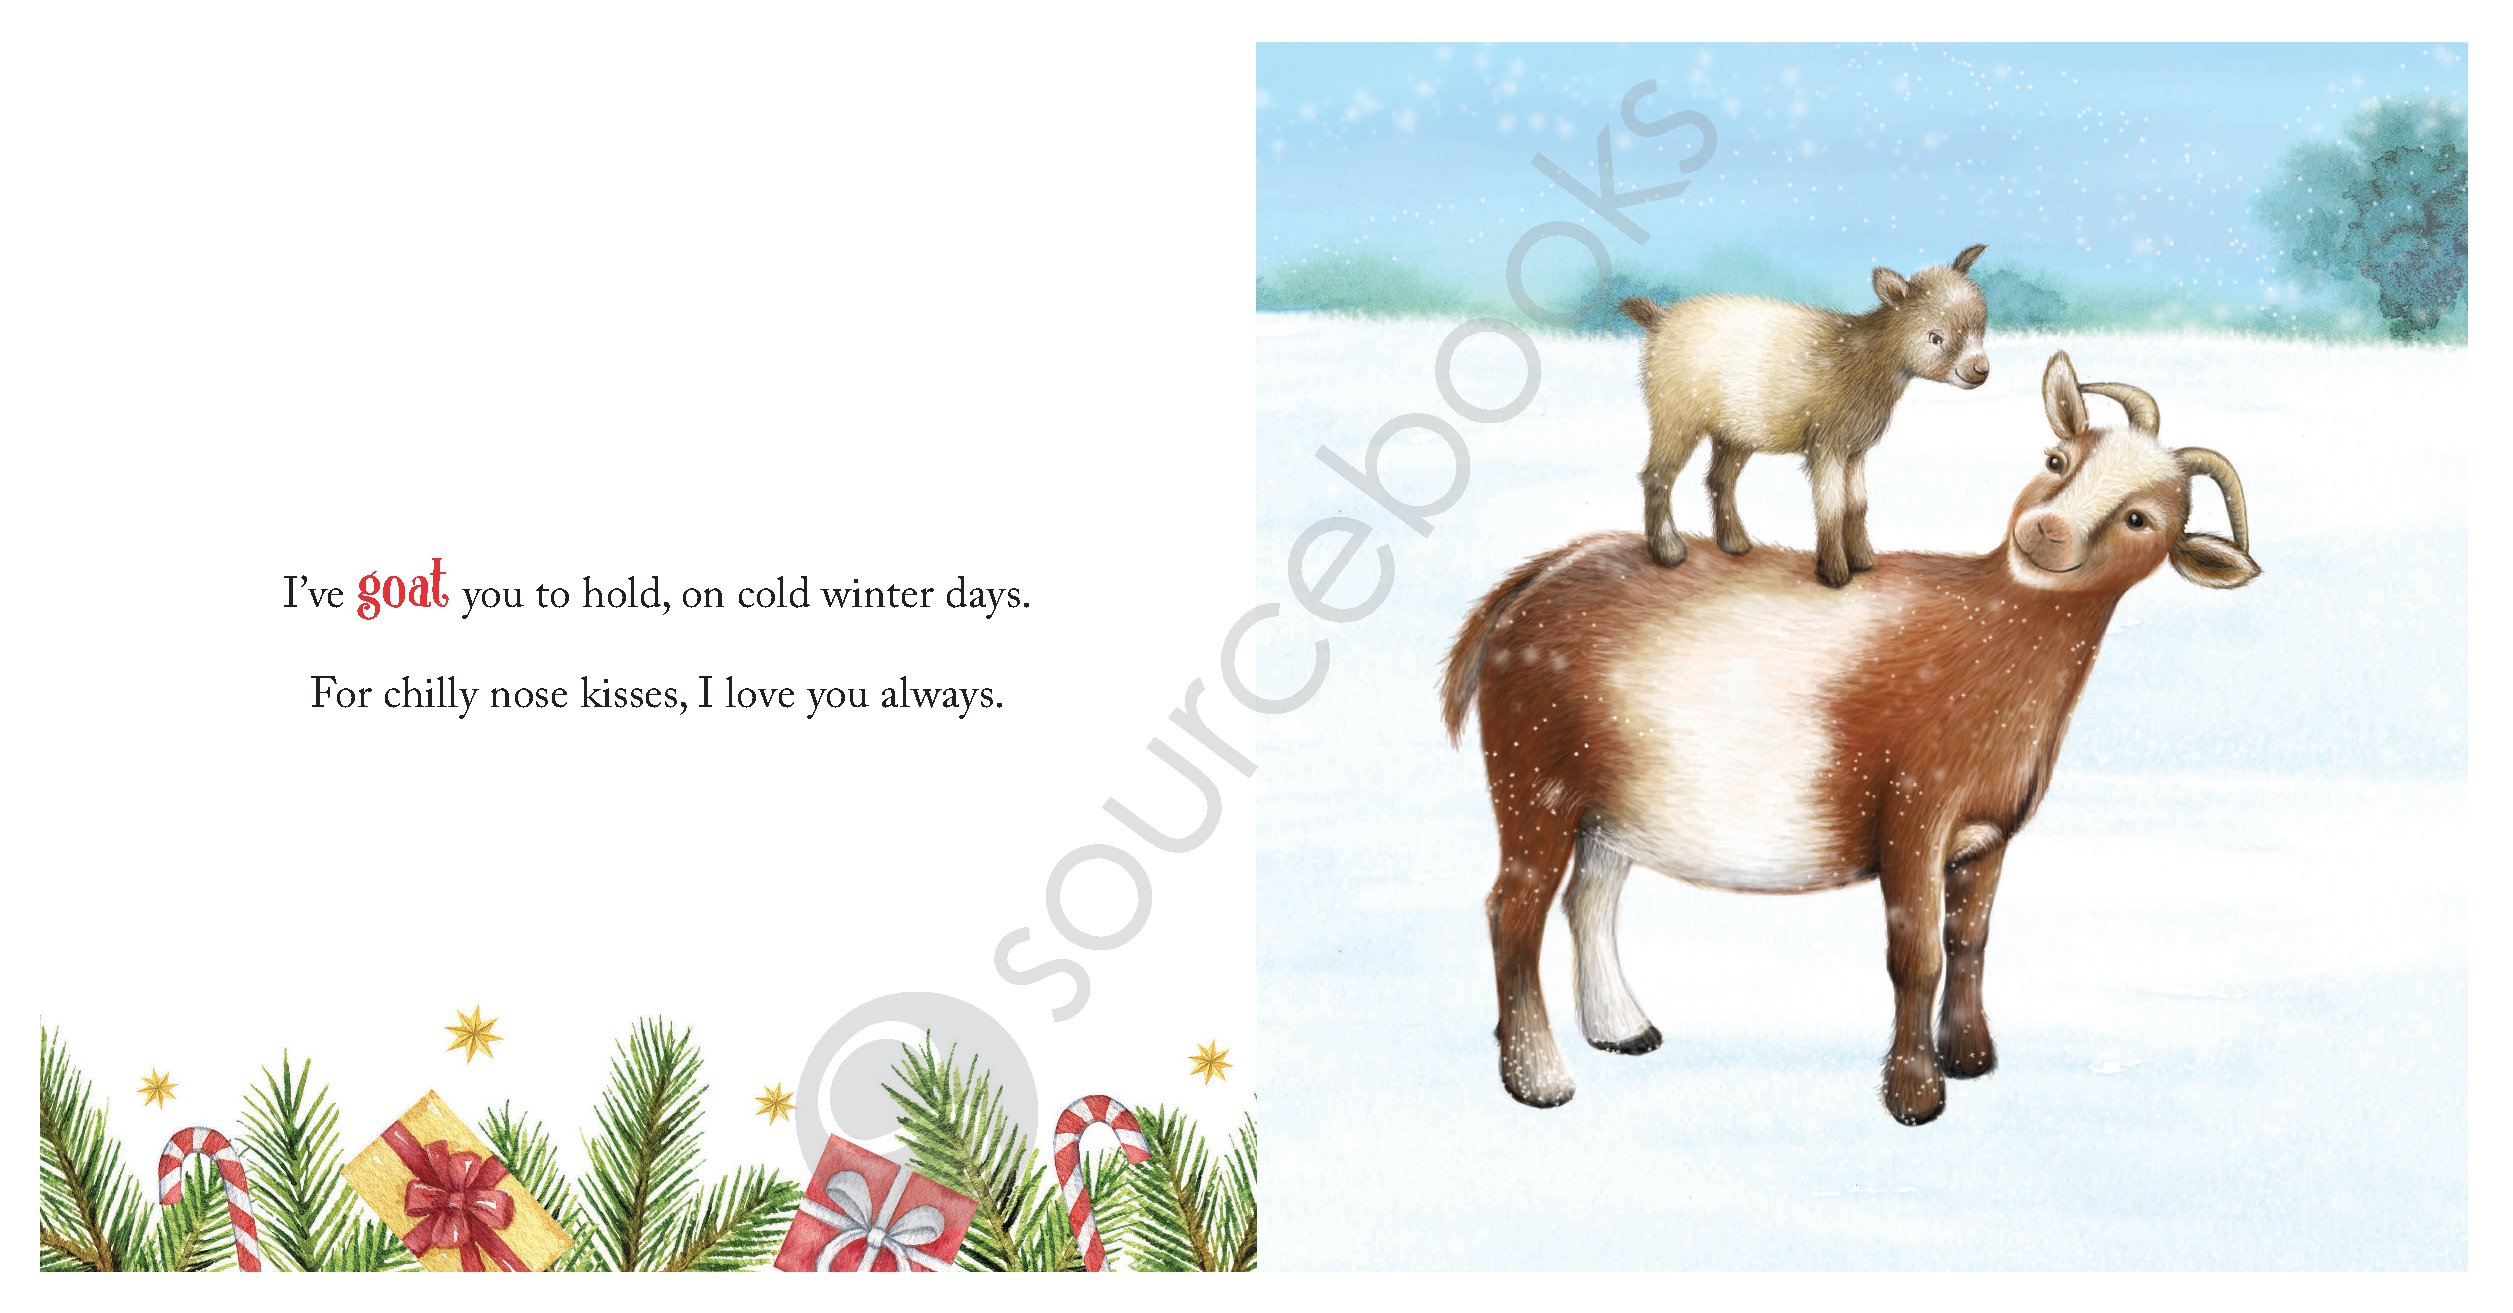 All I Want for Christmas Is Ewe